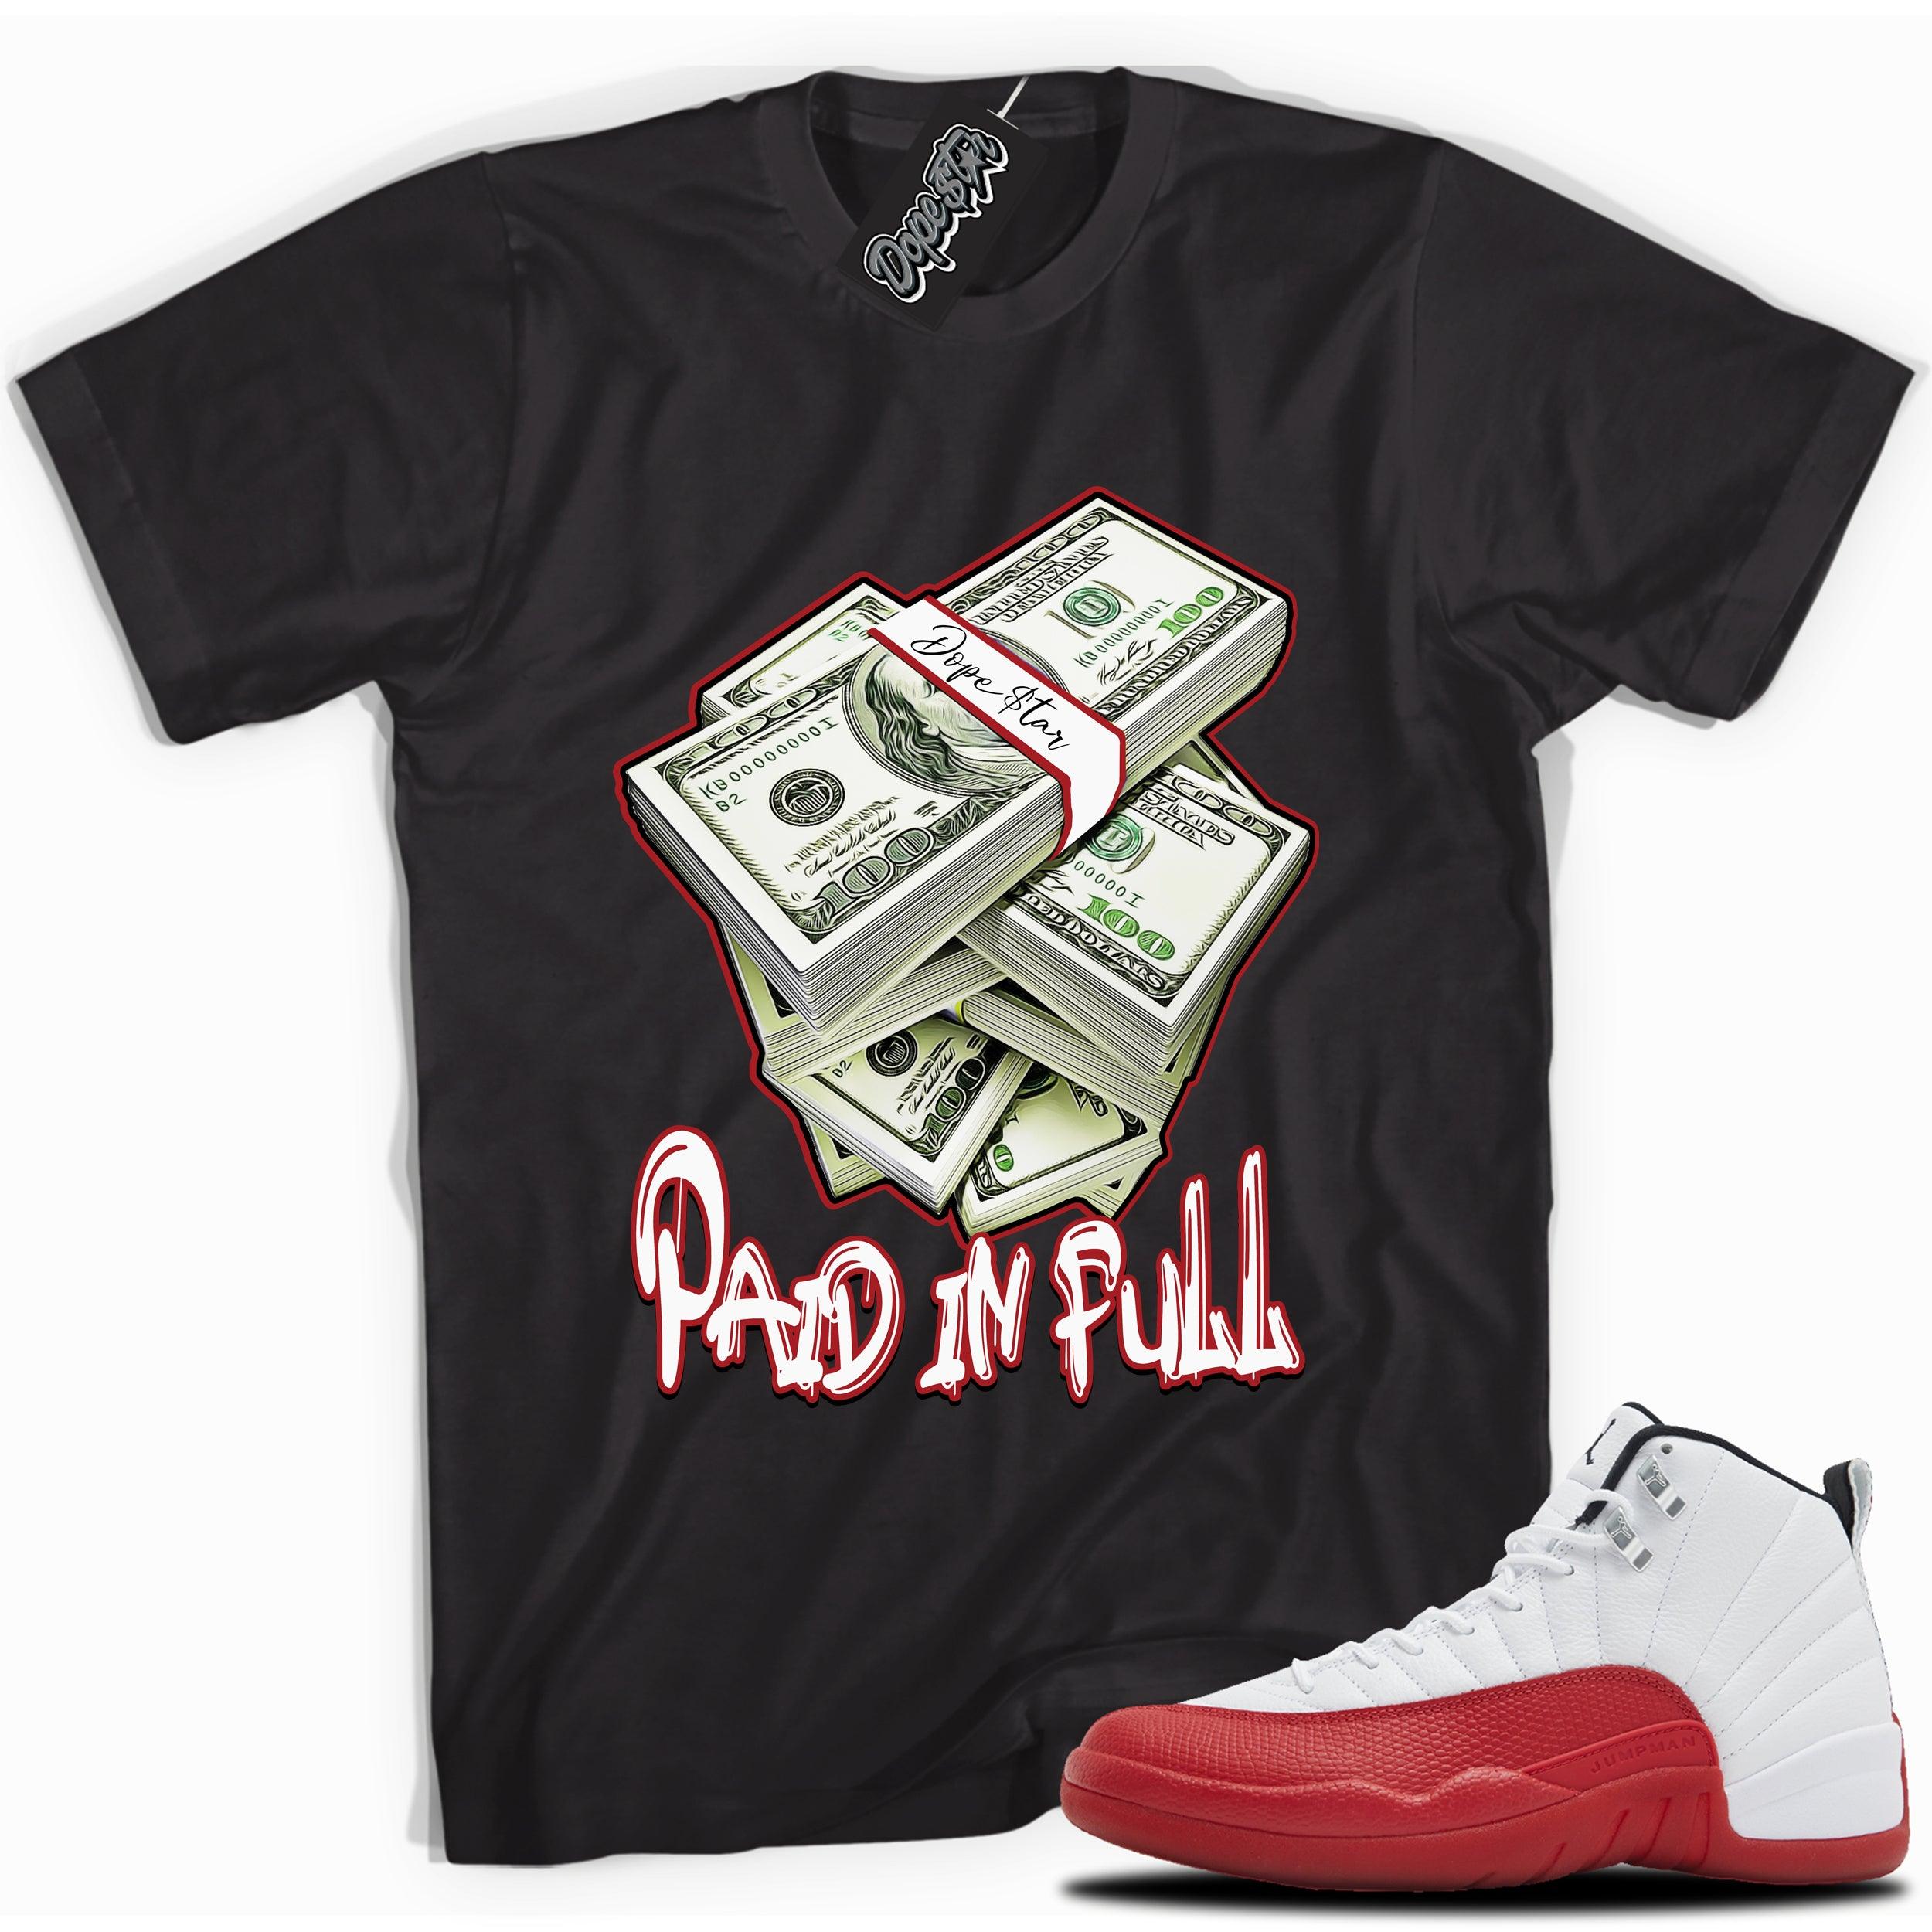 Cool Black graphic tee with “PAID IN FULL” print, that perfectly matches Air Jordan 12 Retro Cherry Red 2023 red and white sneakers 